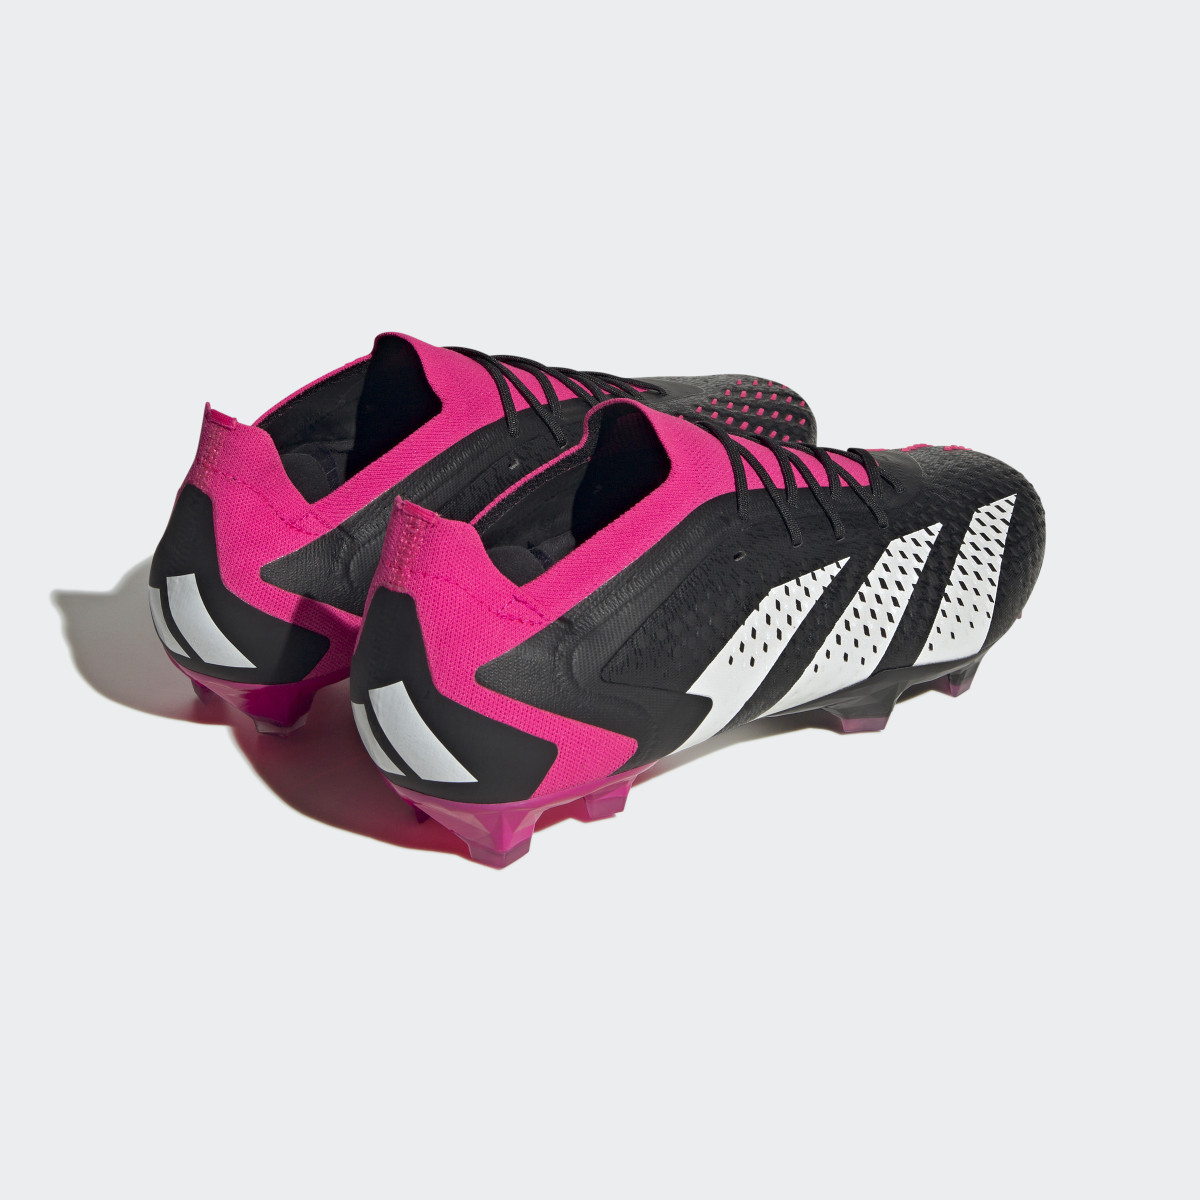 Adidas Predator Accuracy.1 Low Firm Ground Cleats. 10